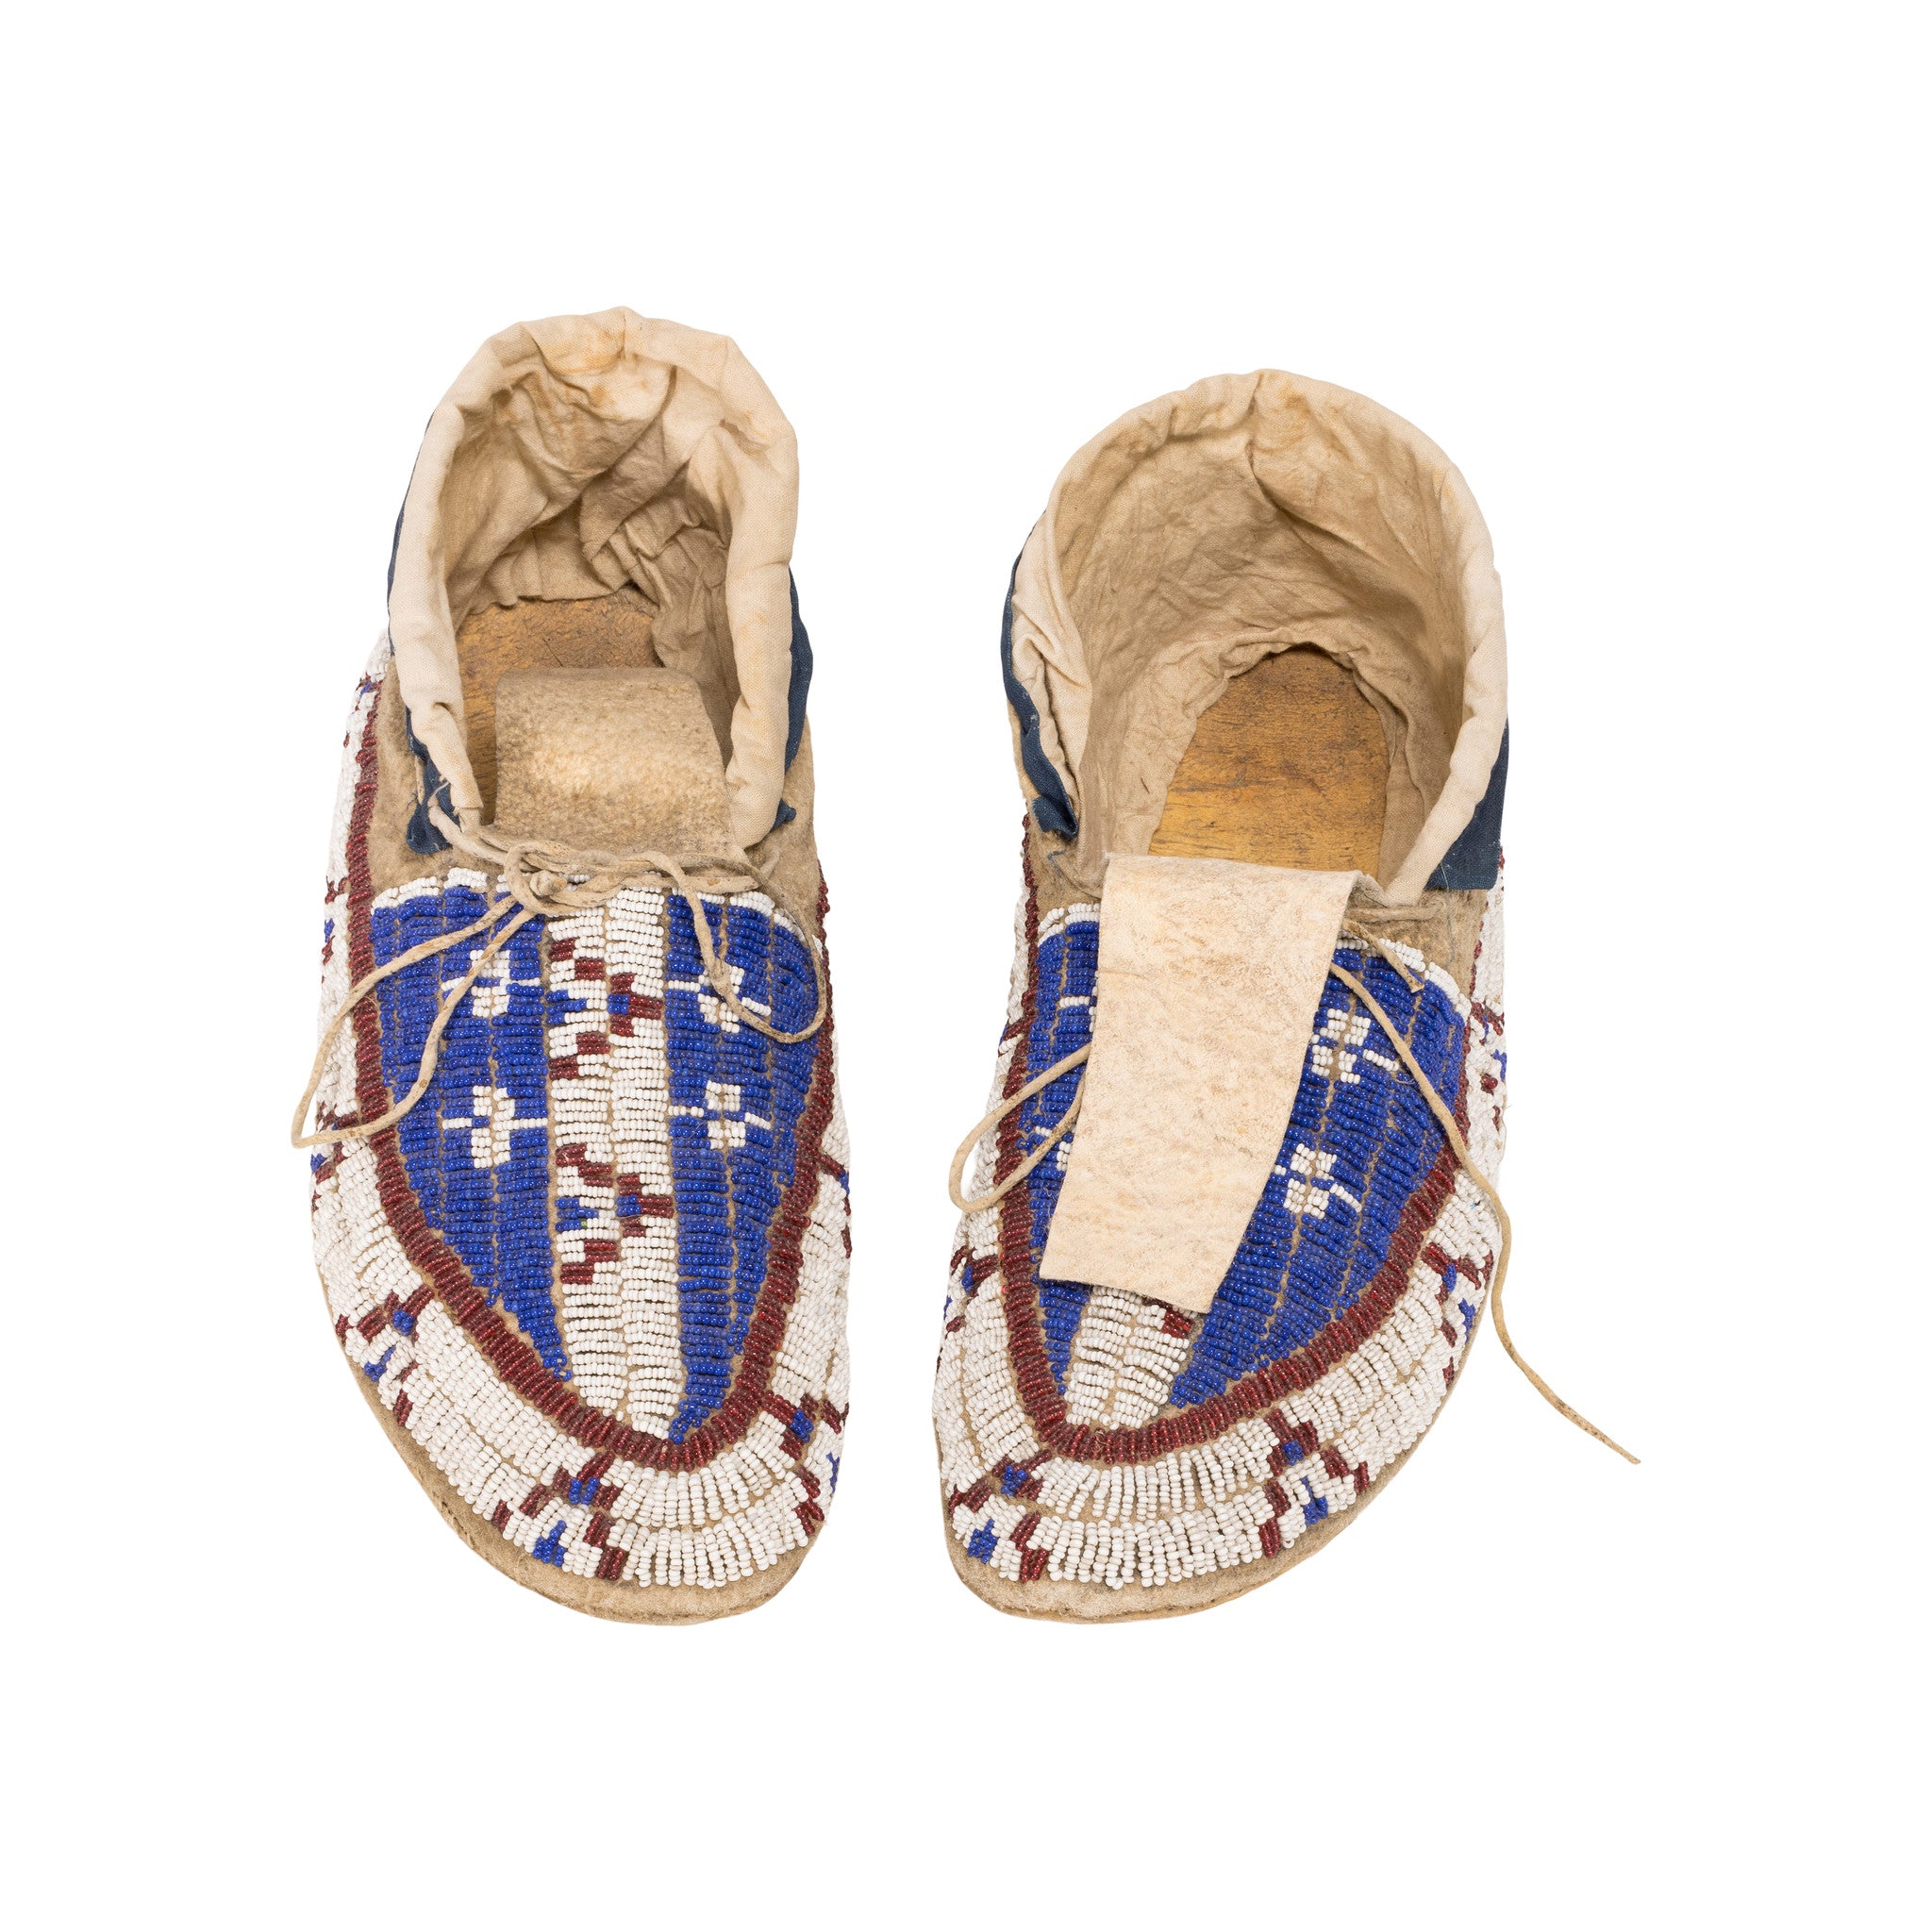 Sioux Moccasins